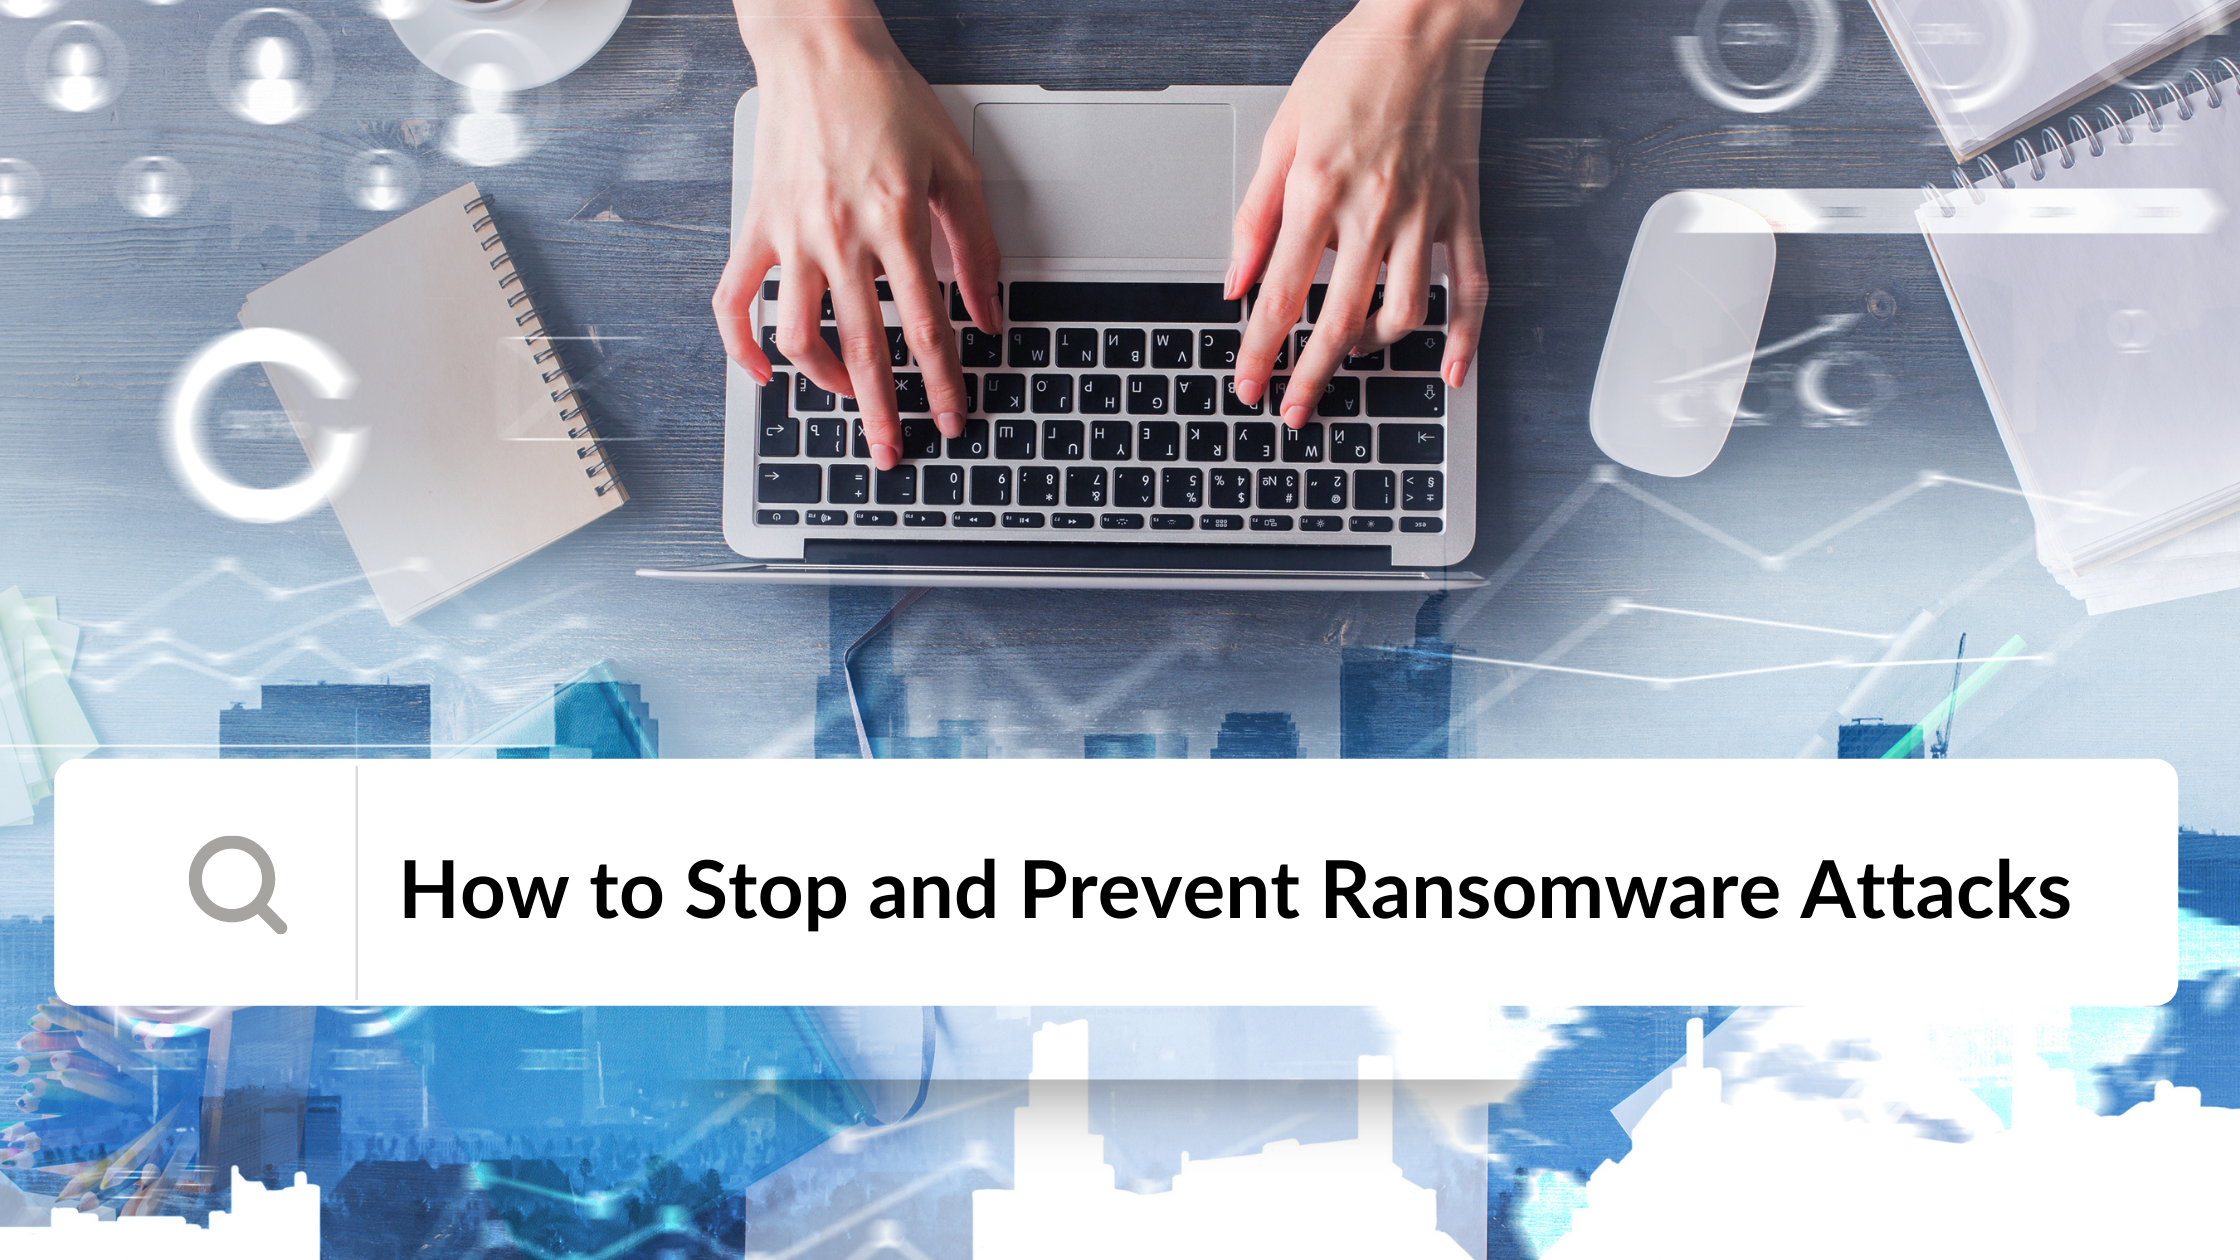 How to stop and prevent ransomware attacks